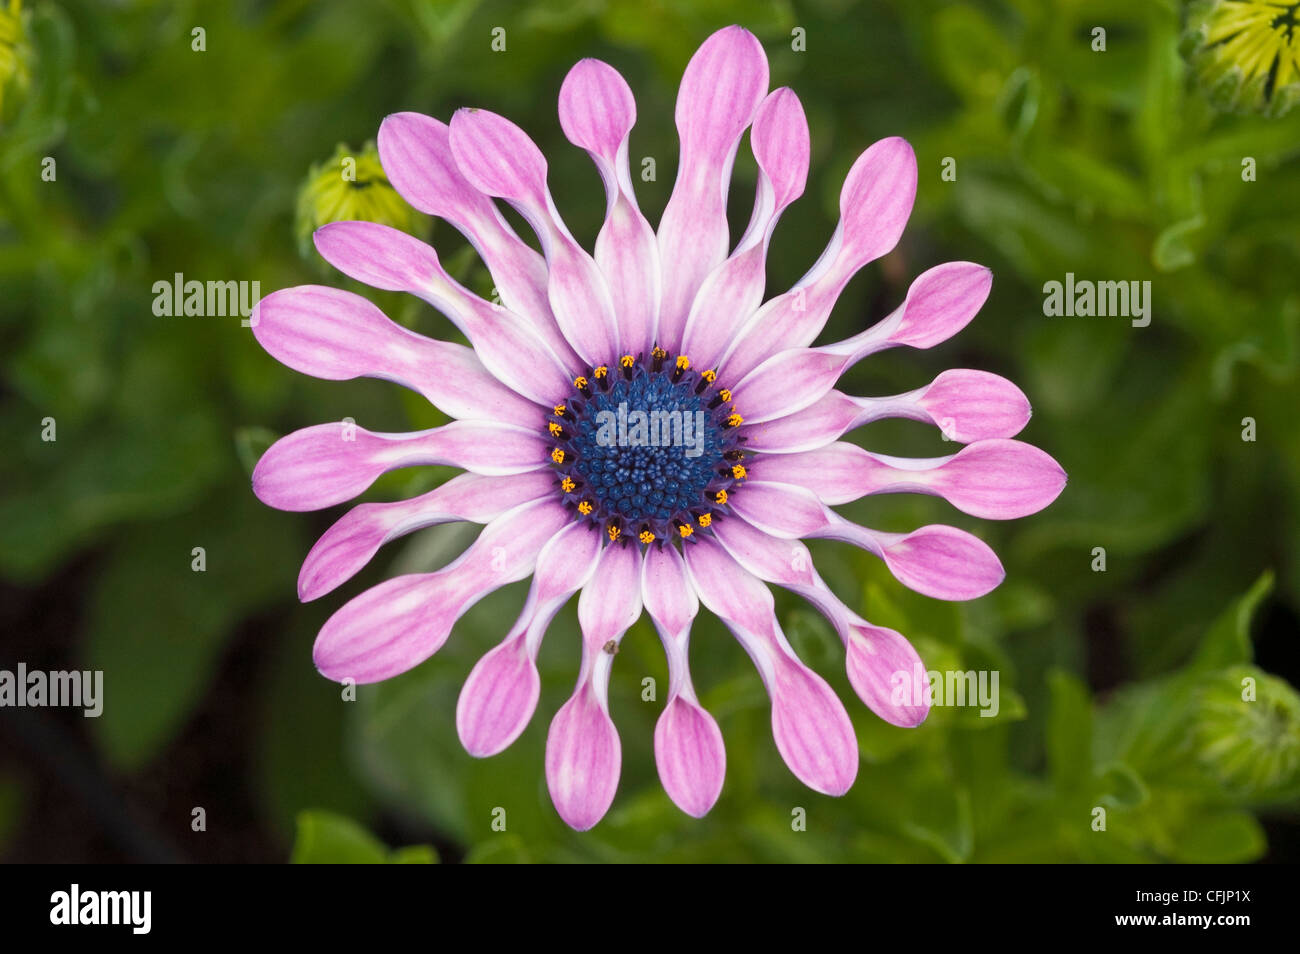 Pink flower close up of Osteospermum hybrid, Soprano ® Lilac Spoon, african daisy Stock Photo